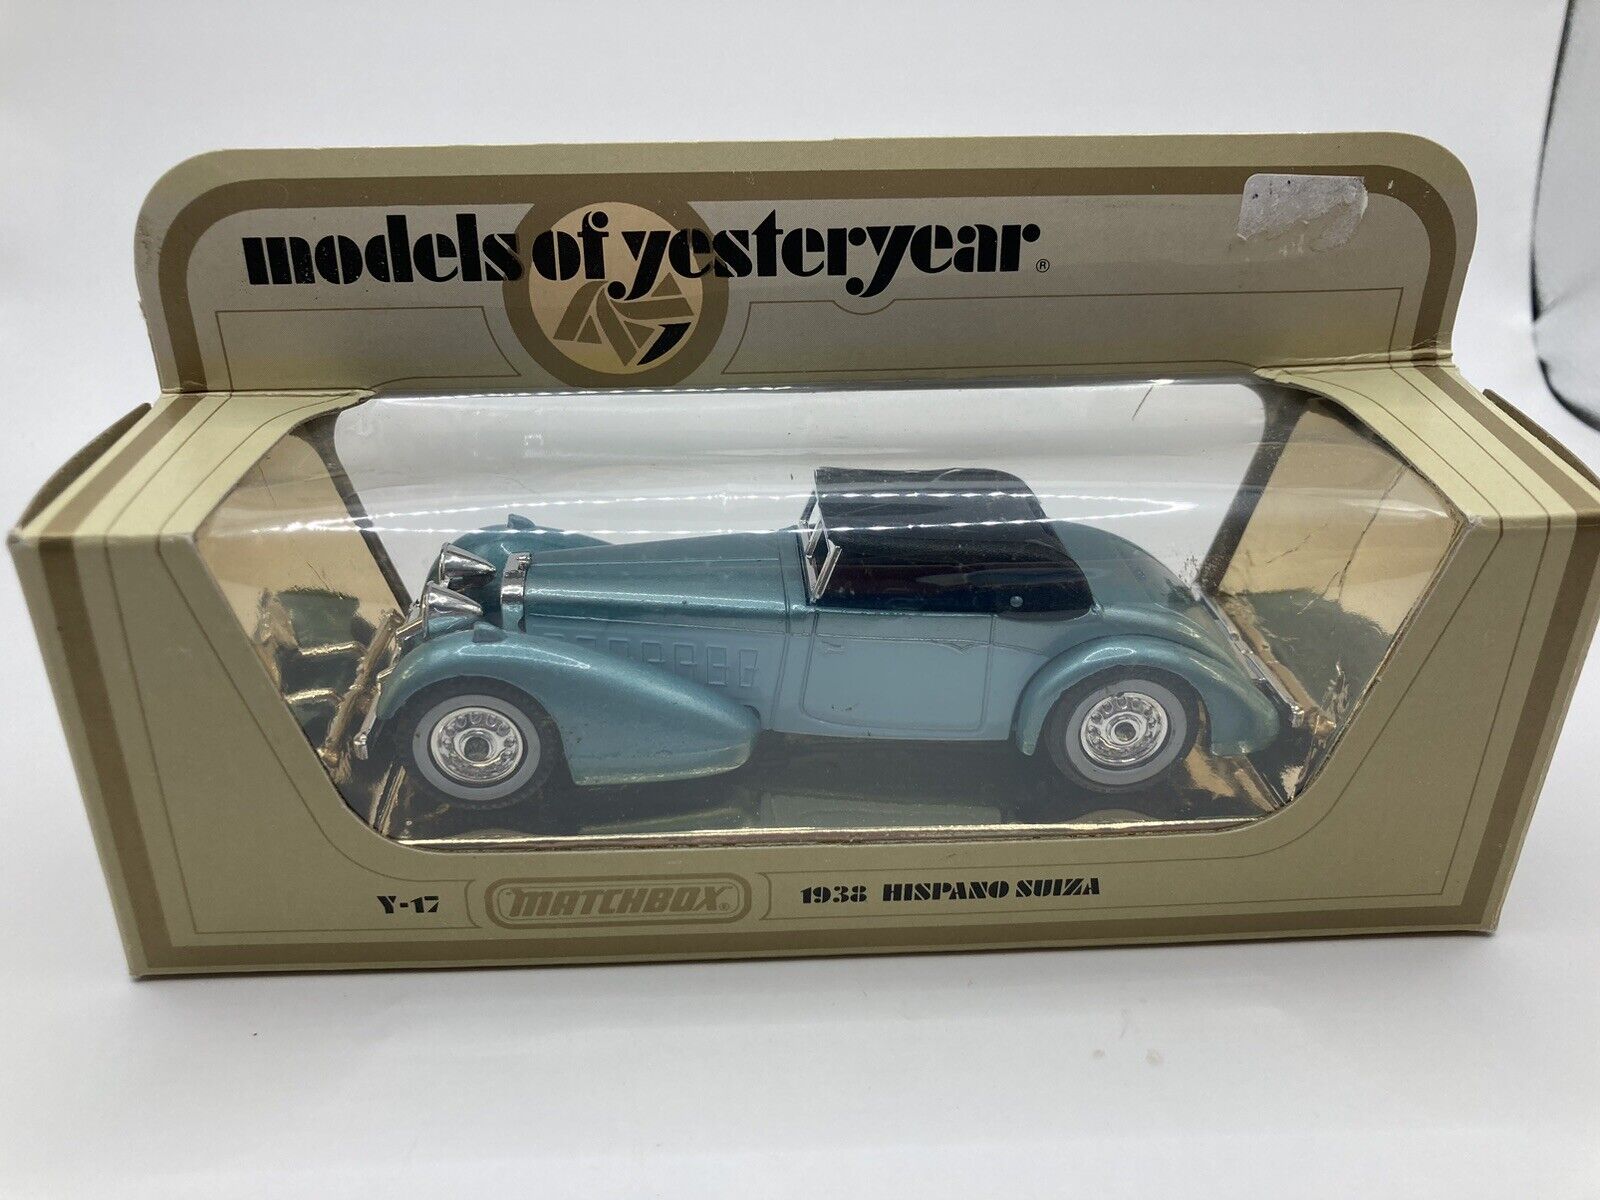 Vintage 1978 Matchbox Models of Yesteryear 1938 Hispano Suiza Y-17 Boxed 48:1